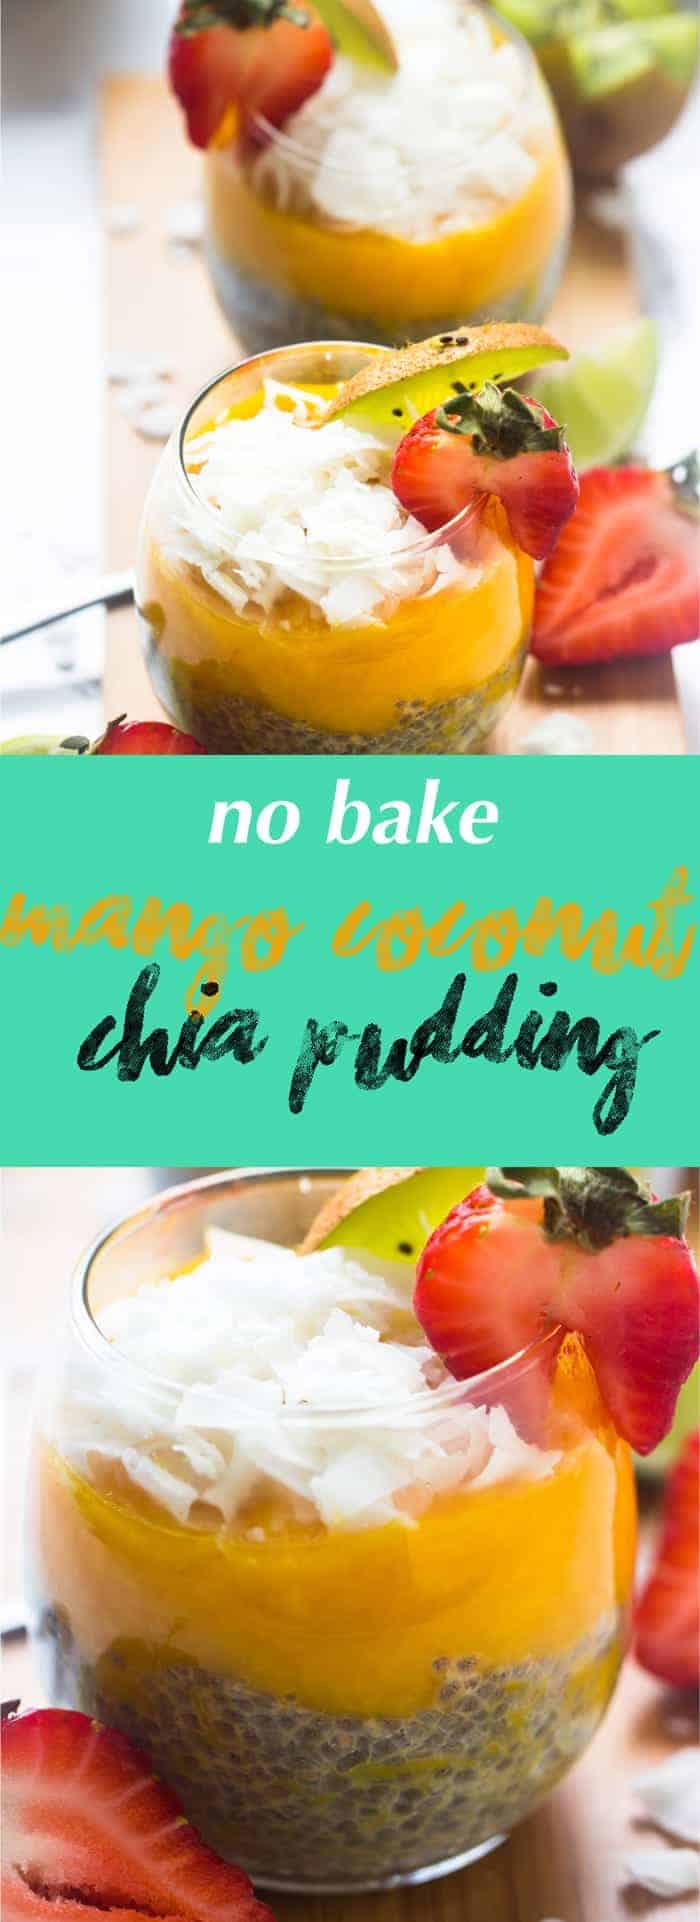 This No Bake Mango Coconut Chia Pudding is made with only 5 ingredients, overnight and is the perfect quick breakfast, snack or even dessert!